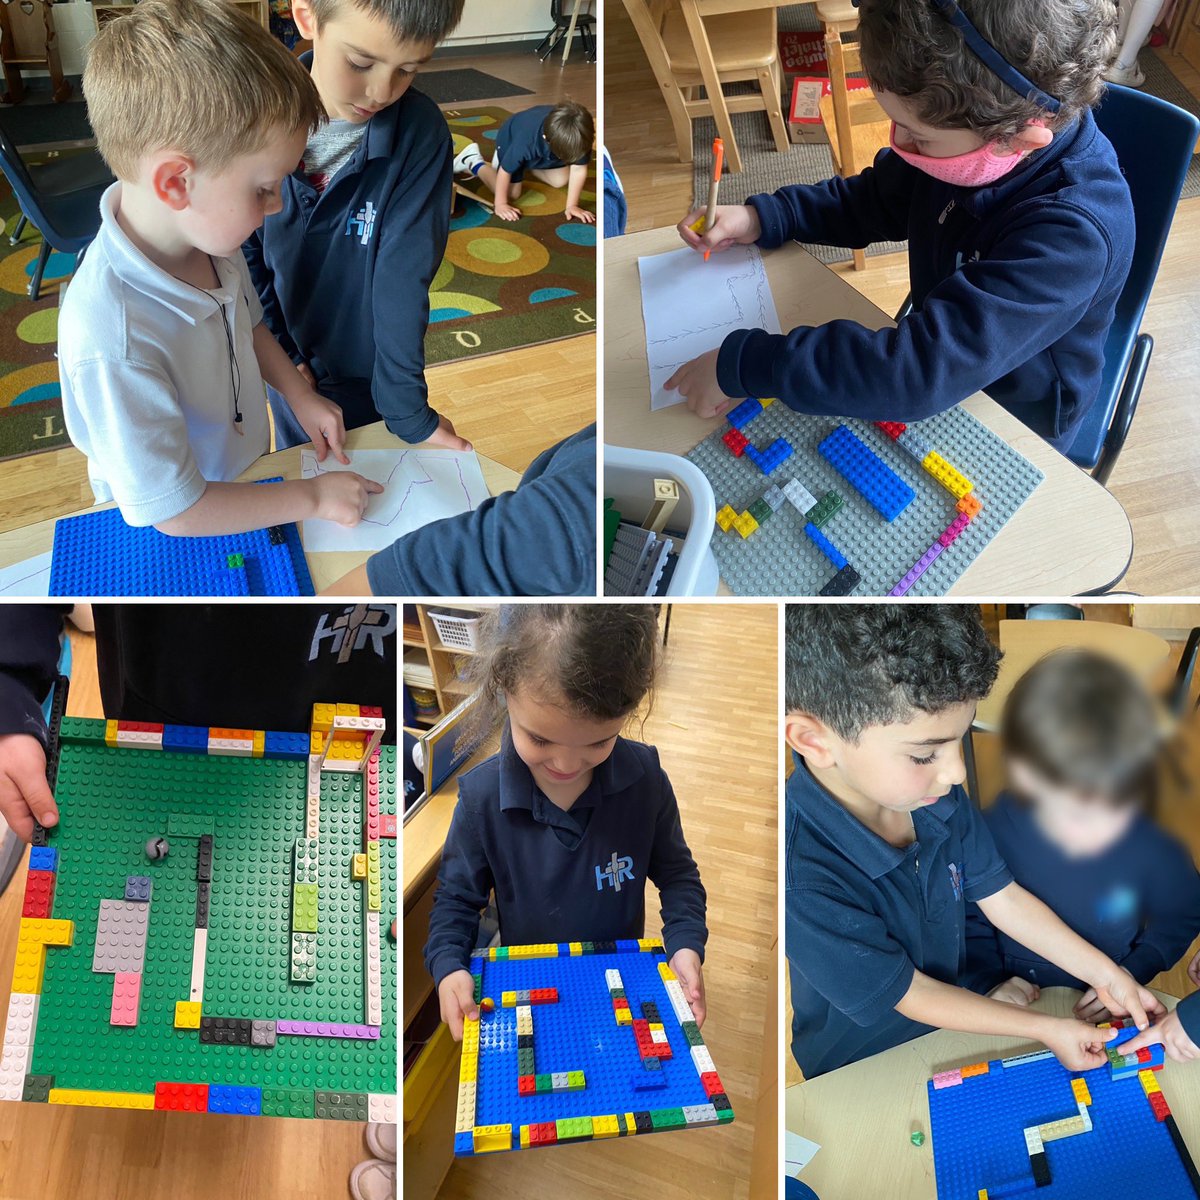 Check out these young engineers! Today our students made blueprints before laying out the design of their marble maze! 🧠 @HolyRosaryM @hcdsbsteam @HCDSB_k